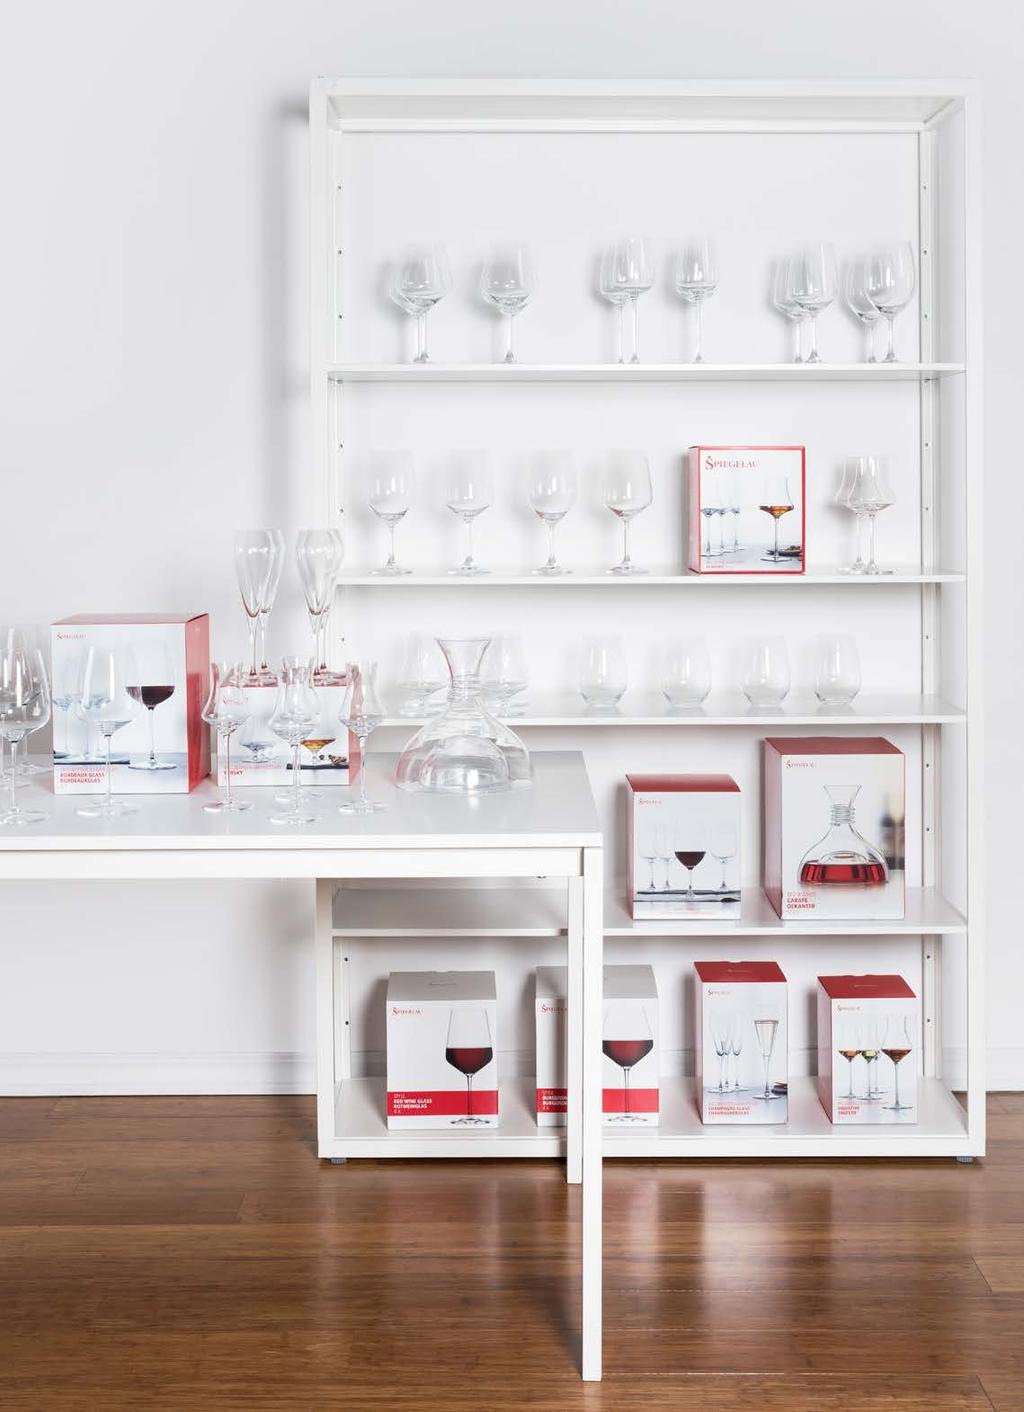 Whether you are a small wine shop or a kitchen emporium, Spiegelau s assortment allows you to offer your customers an